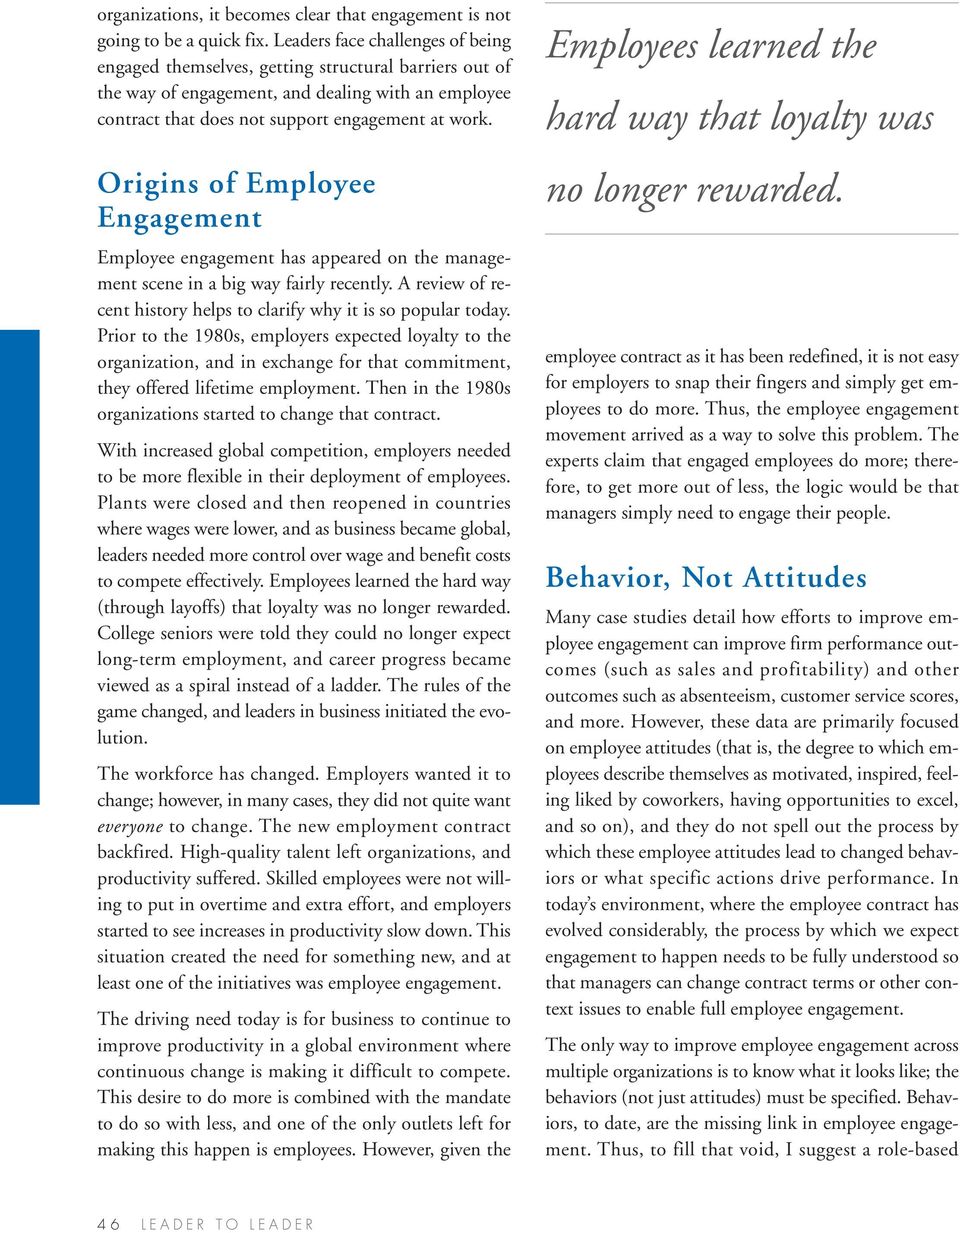 Origins of Employee Engagement Employee engagement has appeared on the management scene in a big way fairly recently. A review of recent history helps to clarify why it is so popular today.